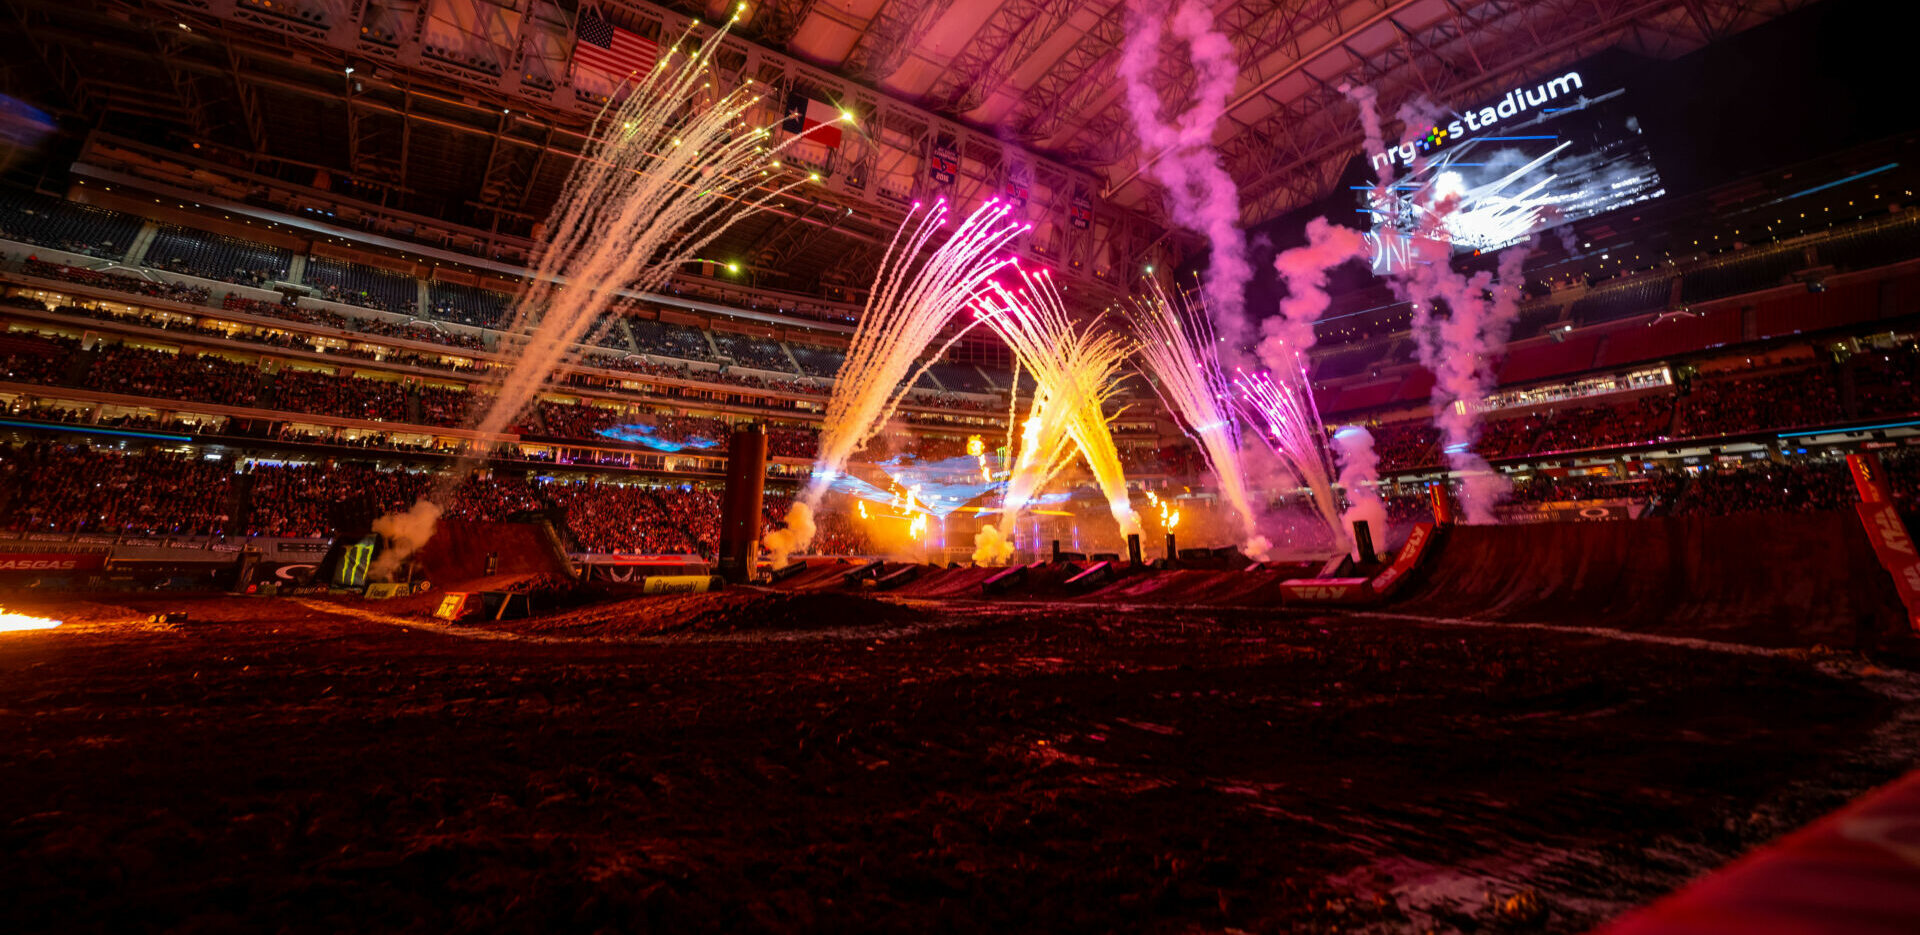 Houston has hosted a round of the Monster Energy AMA Supercross series for 46 years. NRG Stadium lights up during opening ceremonies. Photo courtesy Feld Motor Sports, Inc.